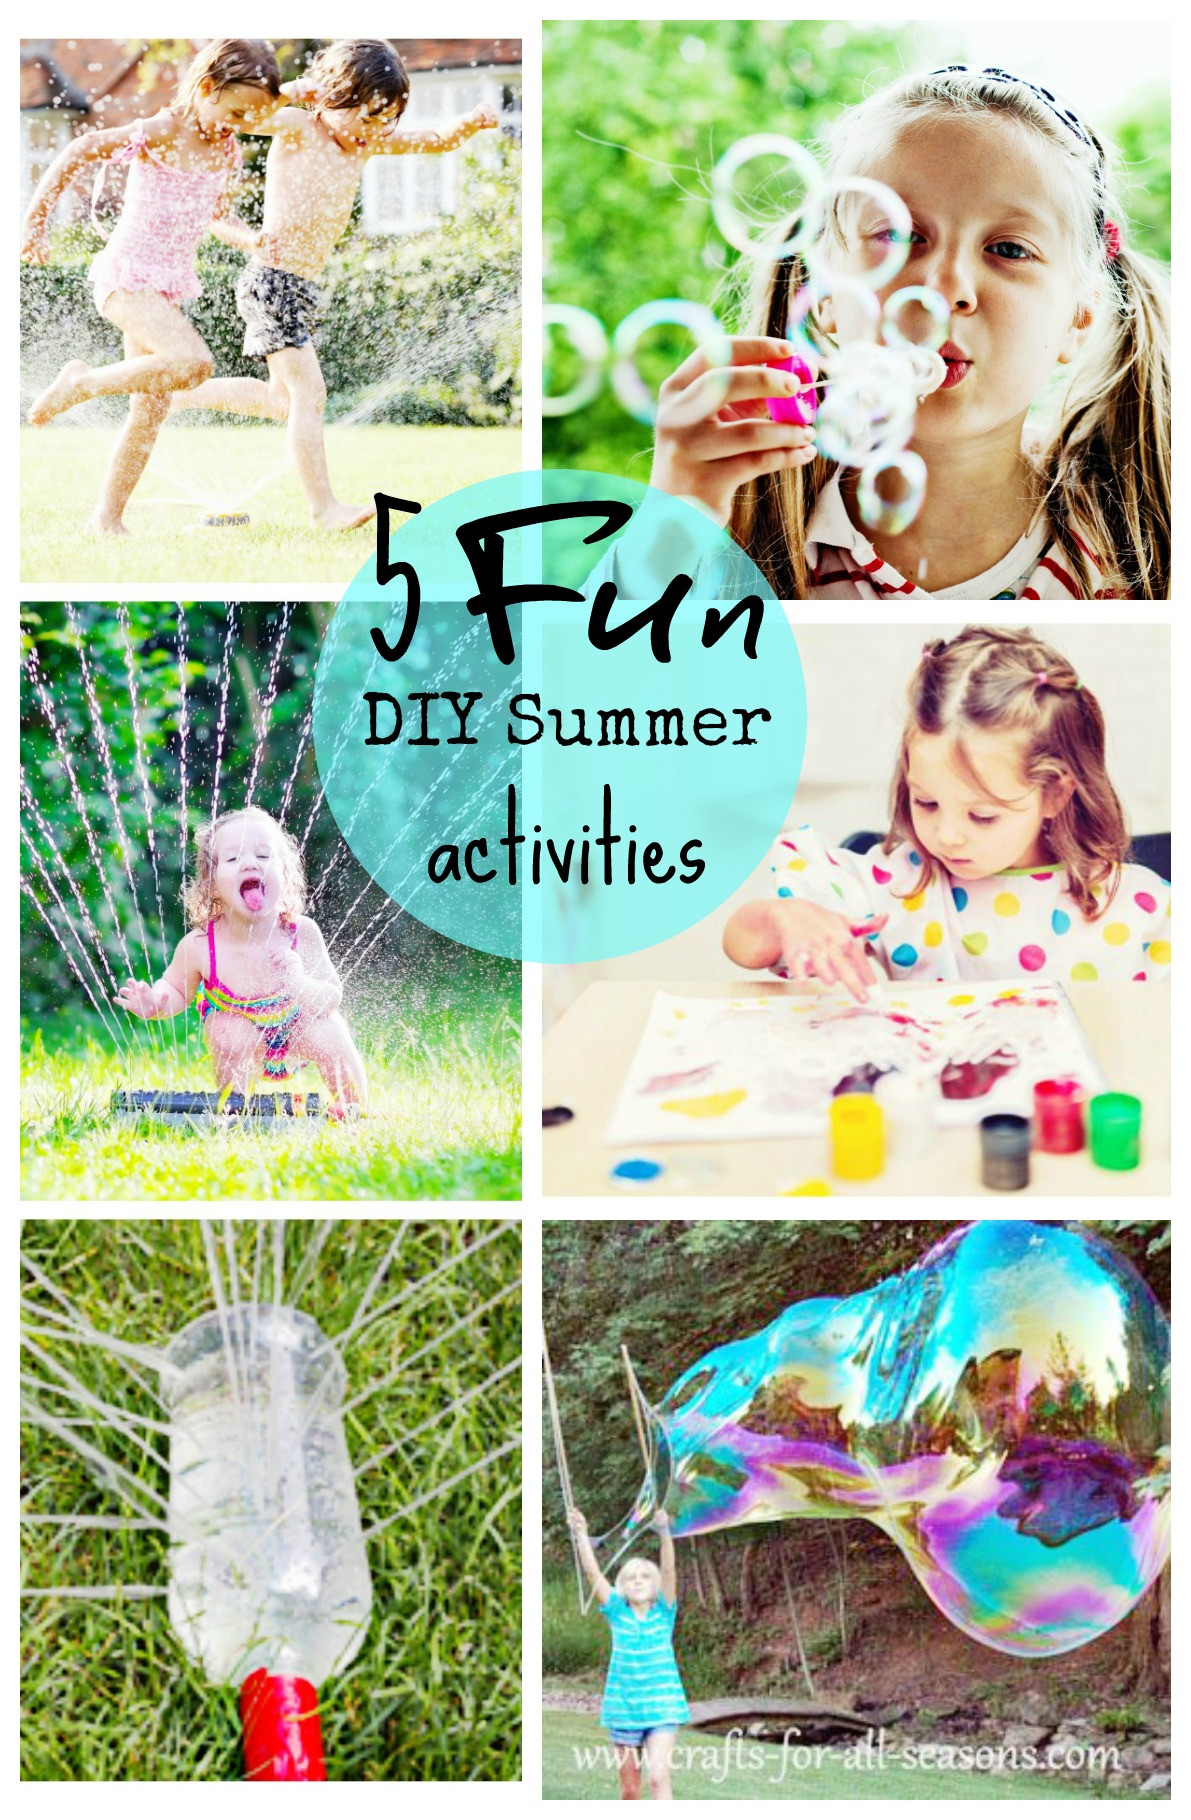 DIY Activities For Toddlers
 DIY kids activities for the summer